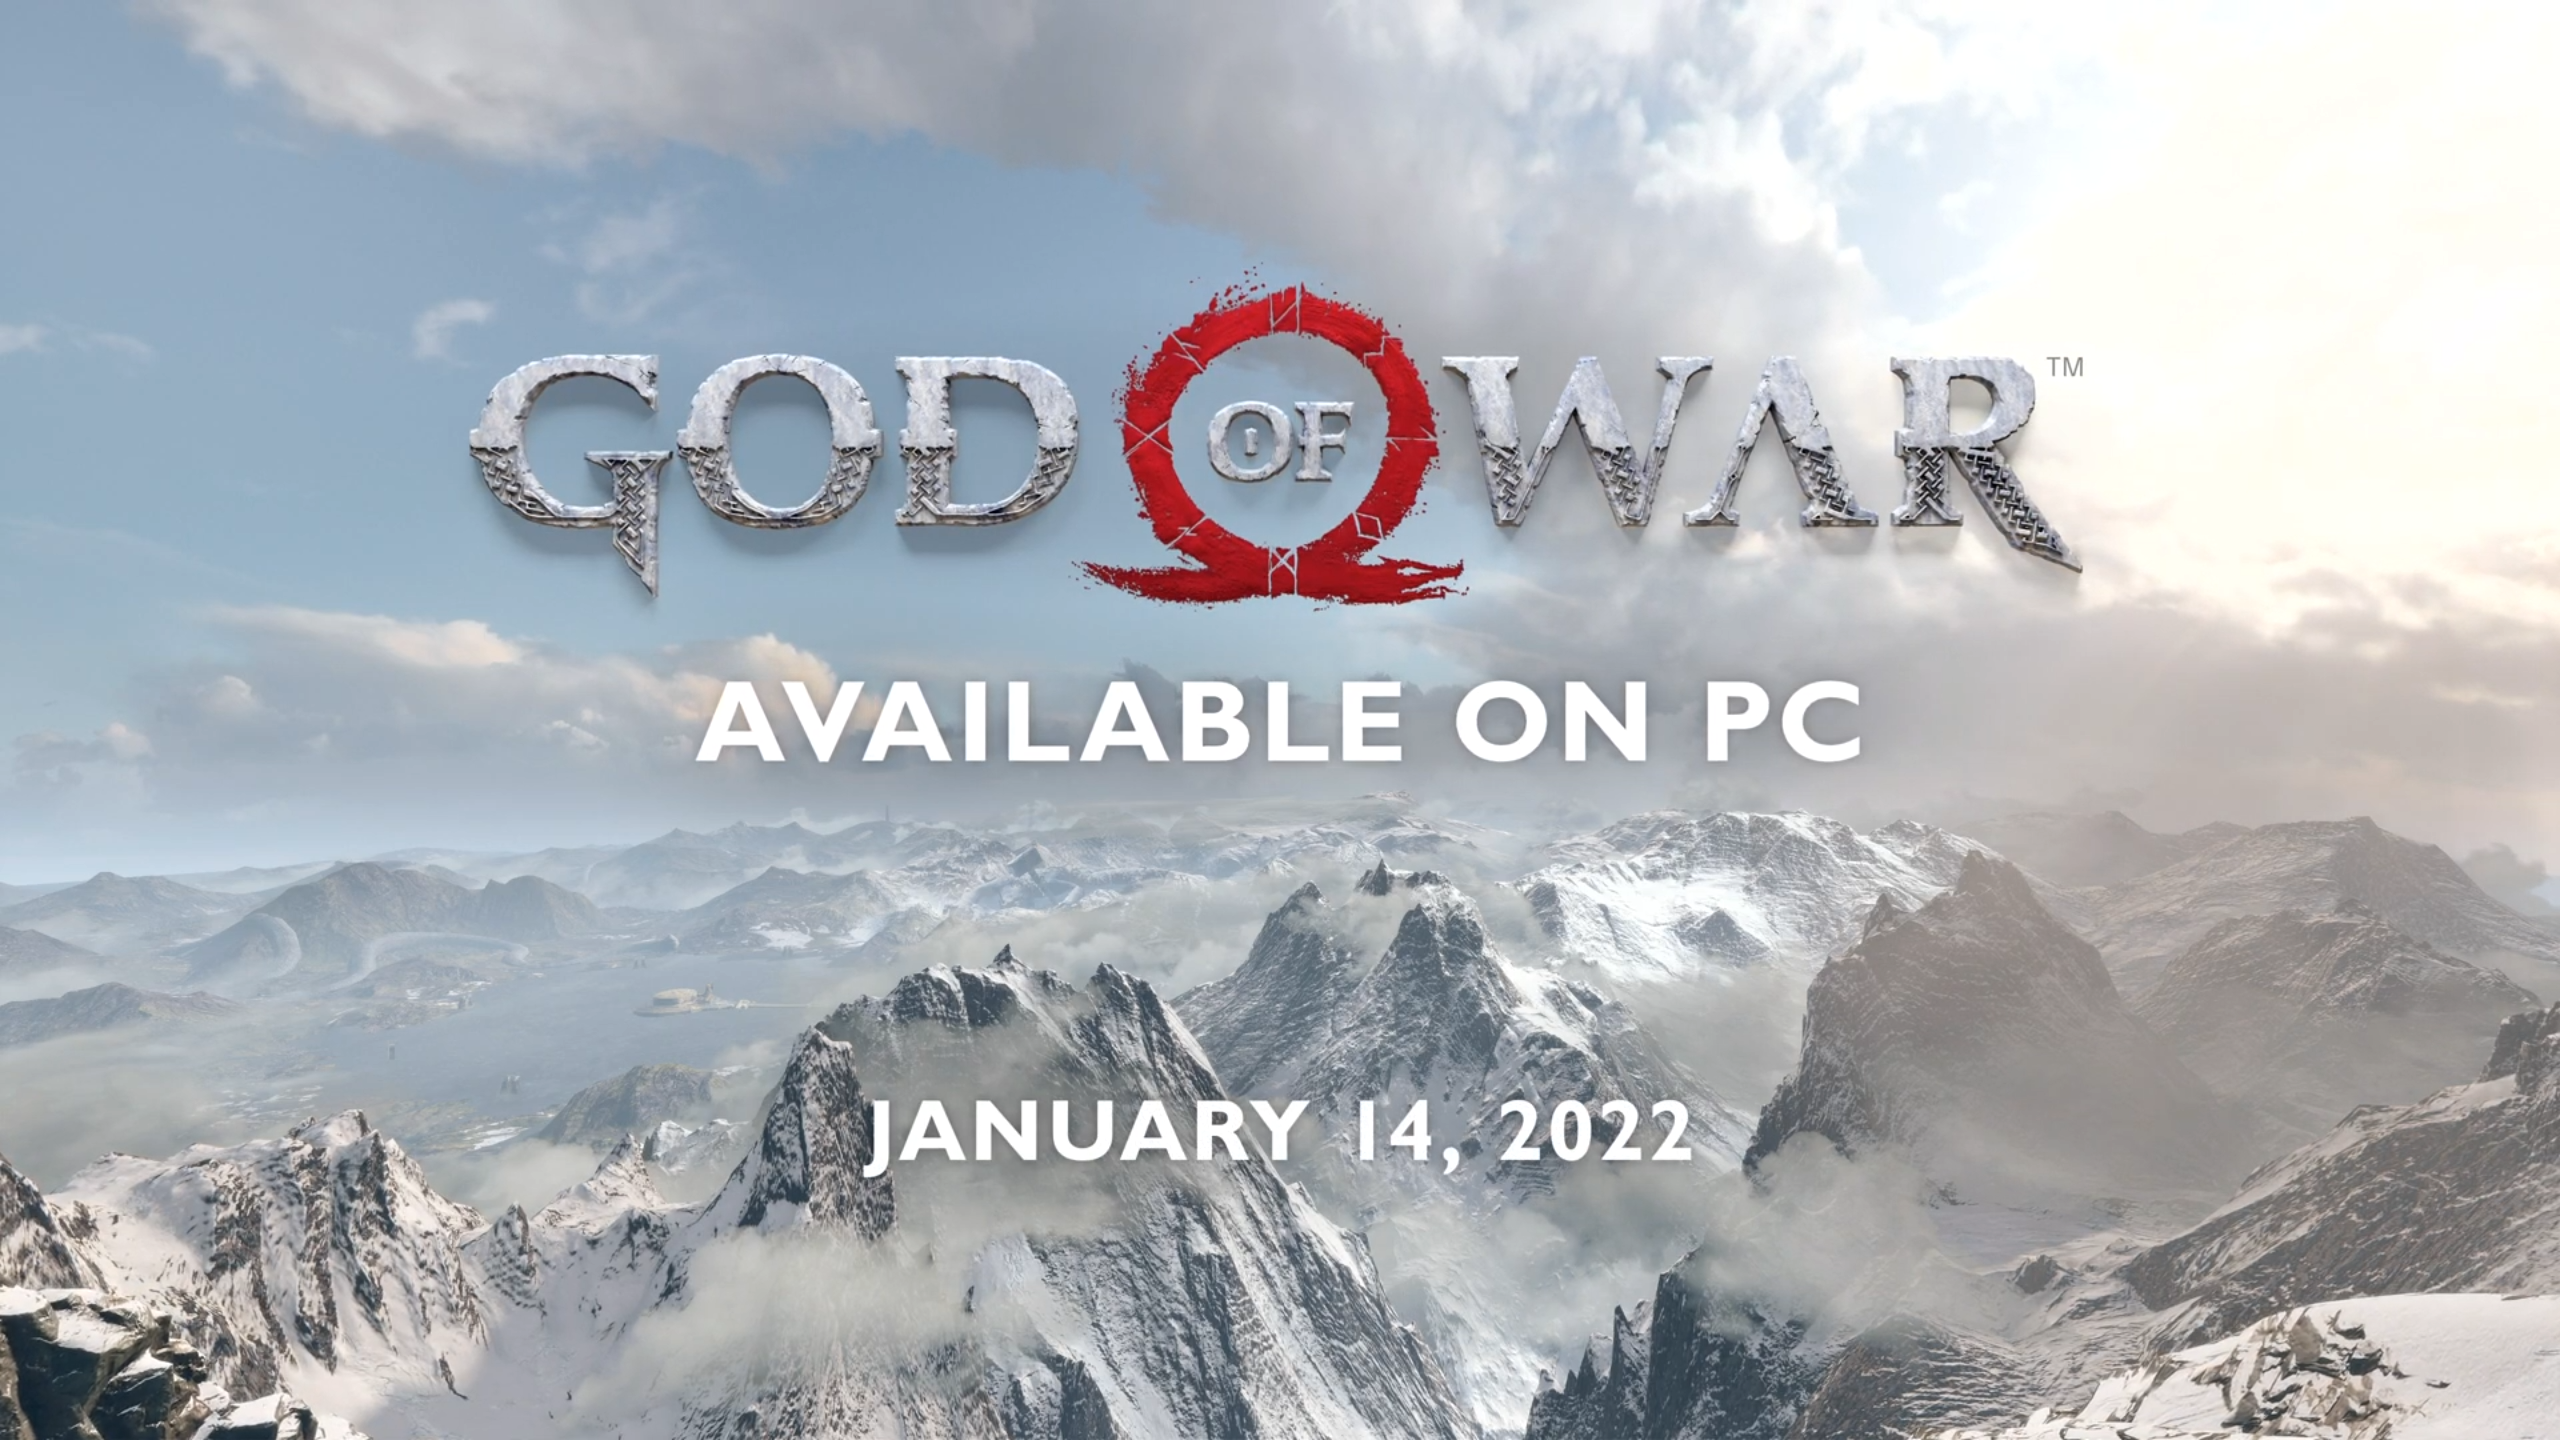 God of War (2018) is coming to PC in January – Destructoid